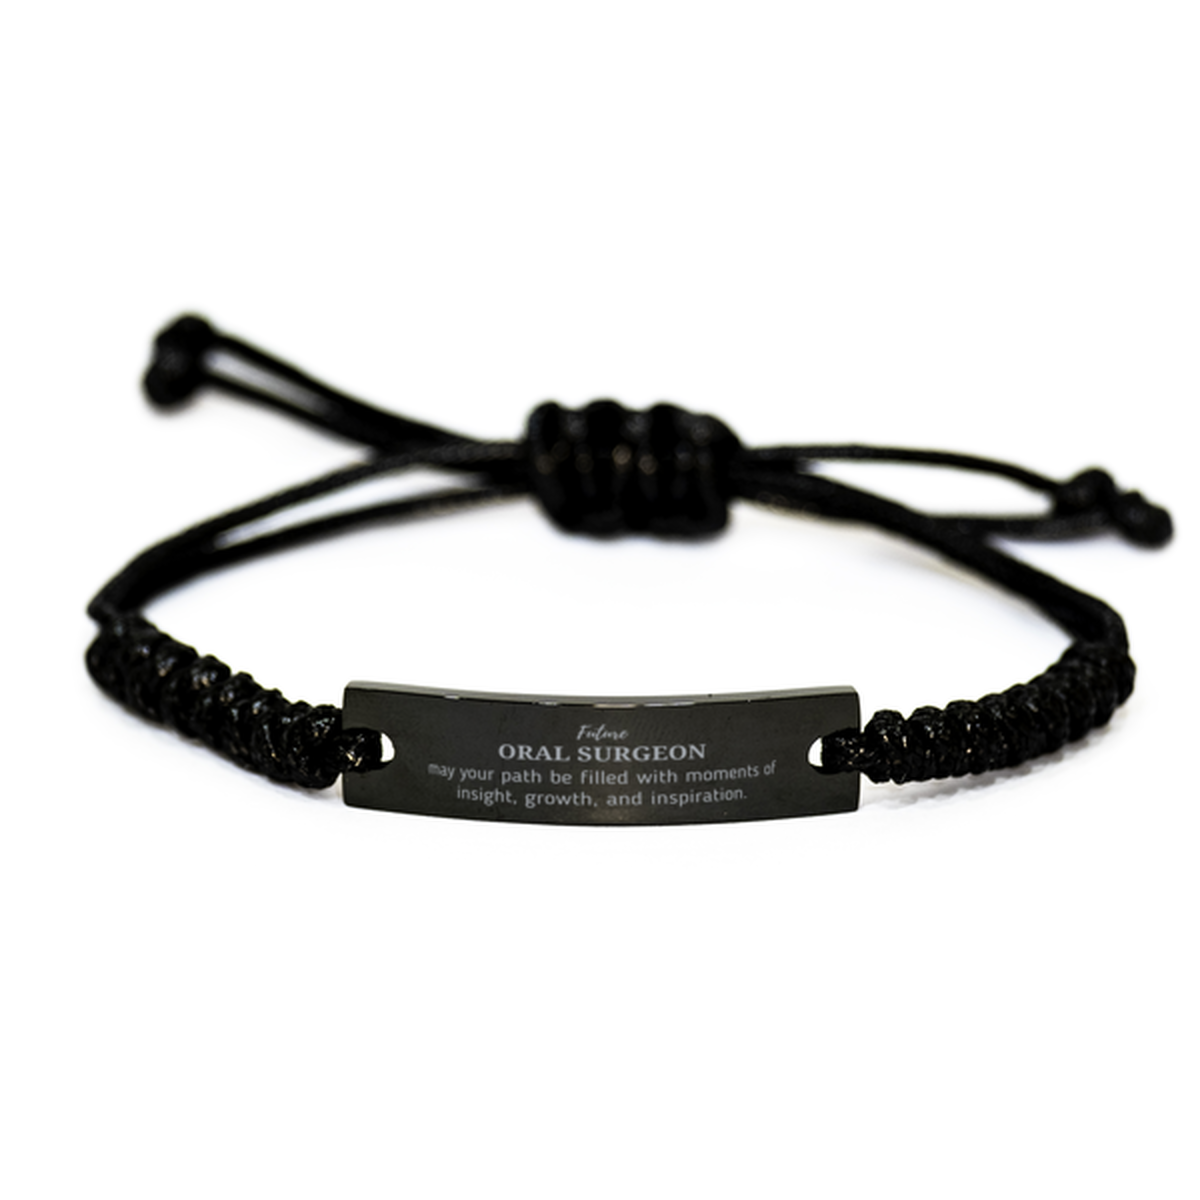 Future Oral Surgeon Gifts, May your path be filled with moments of insight, Graduation Gifts for New Oral Surgeon, Christmas Unique Black Rope Bracelet For Men, Women, Friends